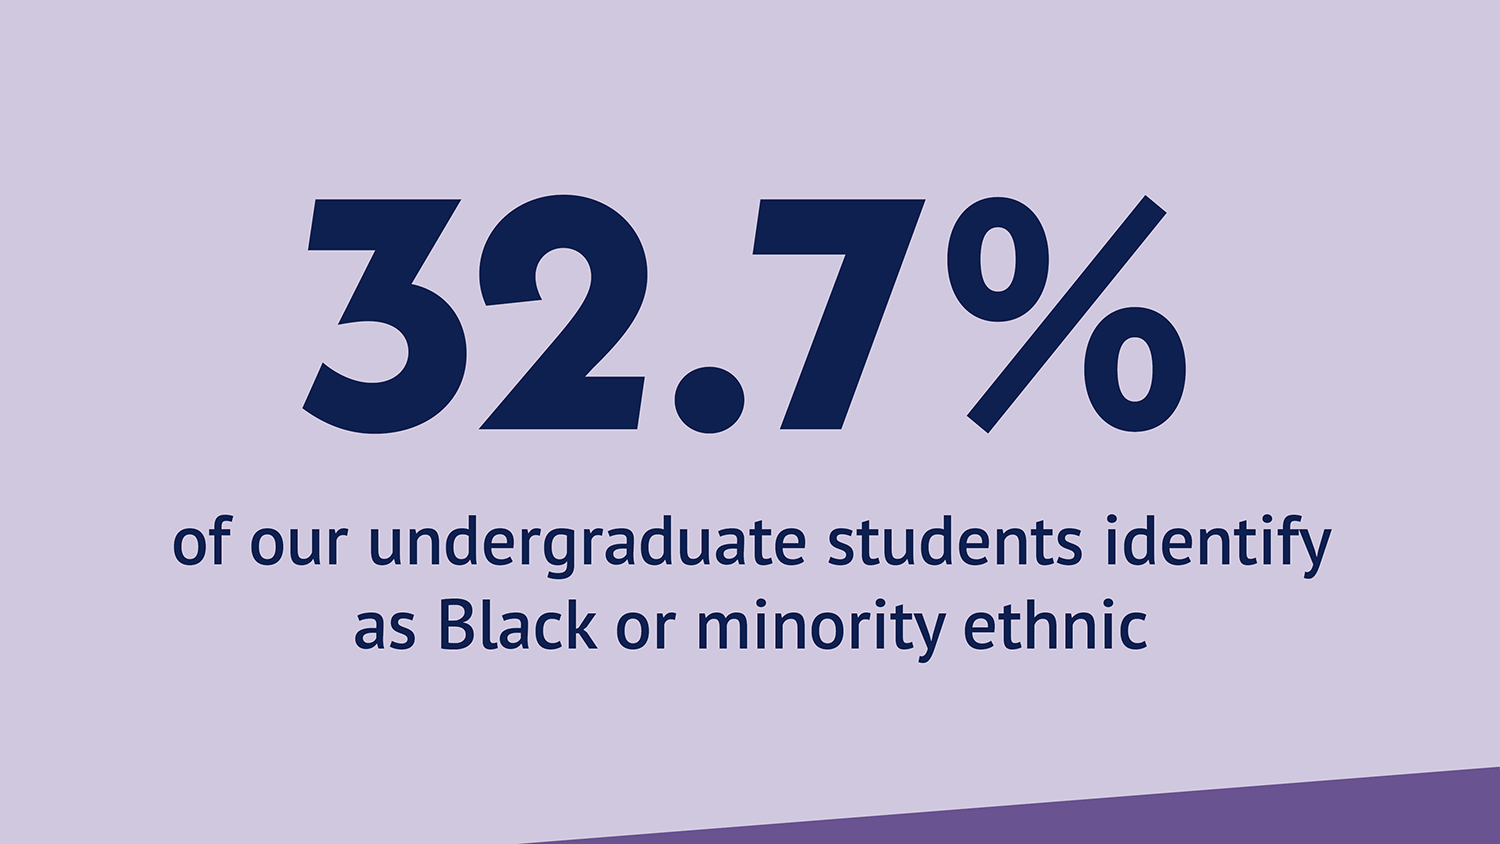 32.7% of our undergraduate students identify as Black or minority ethnic. 